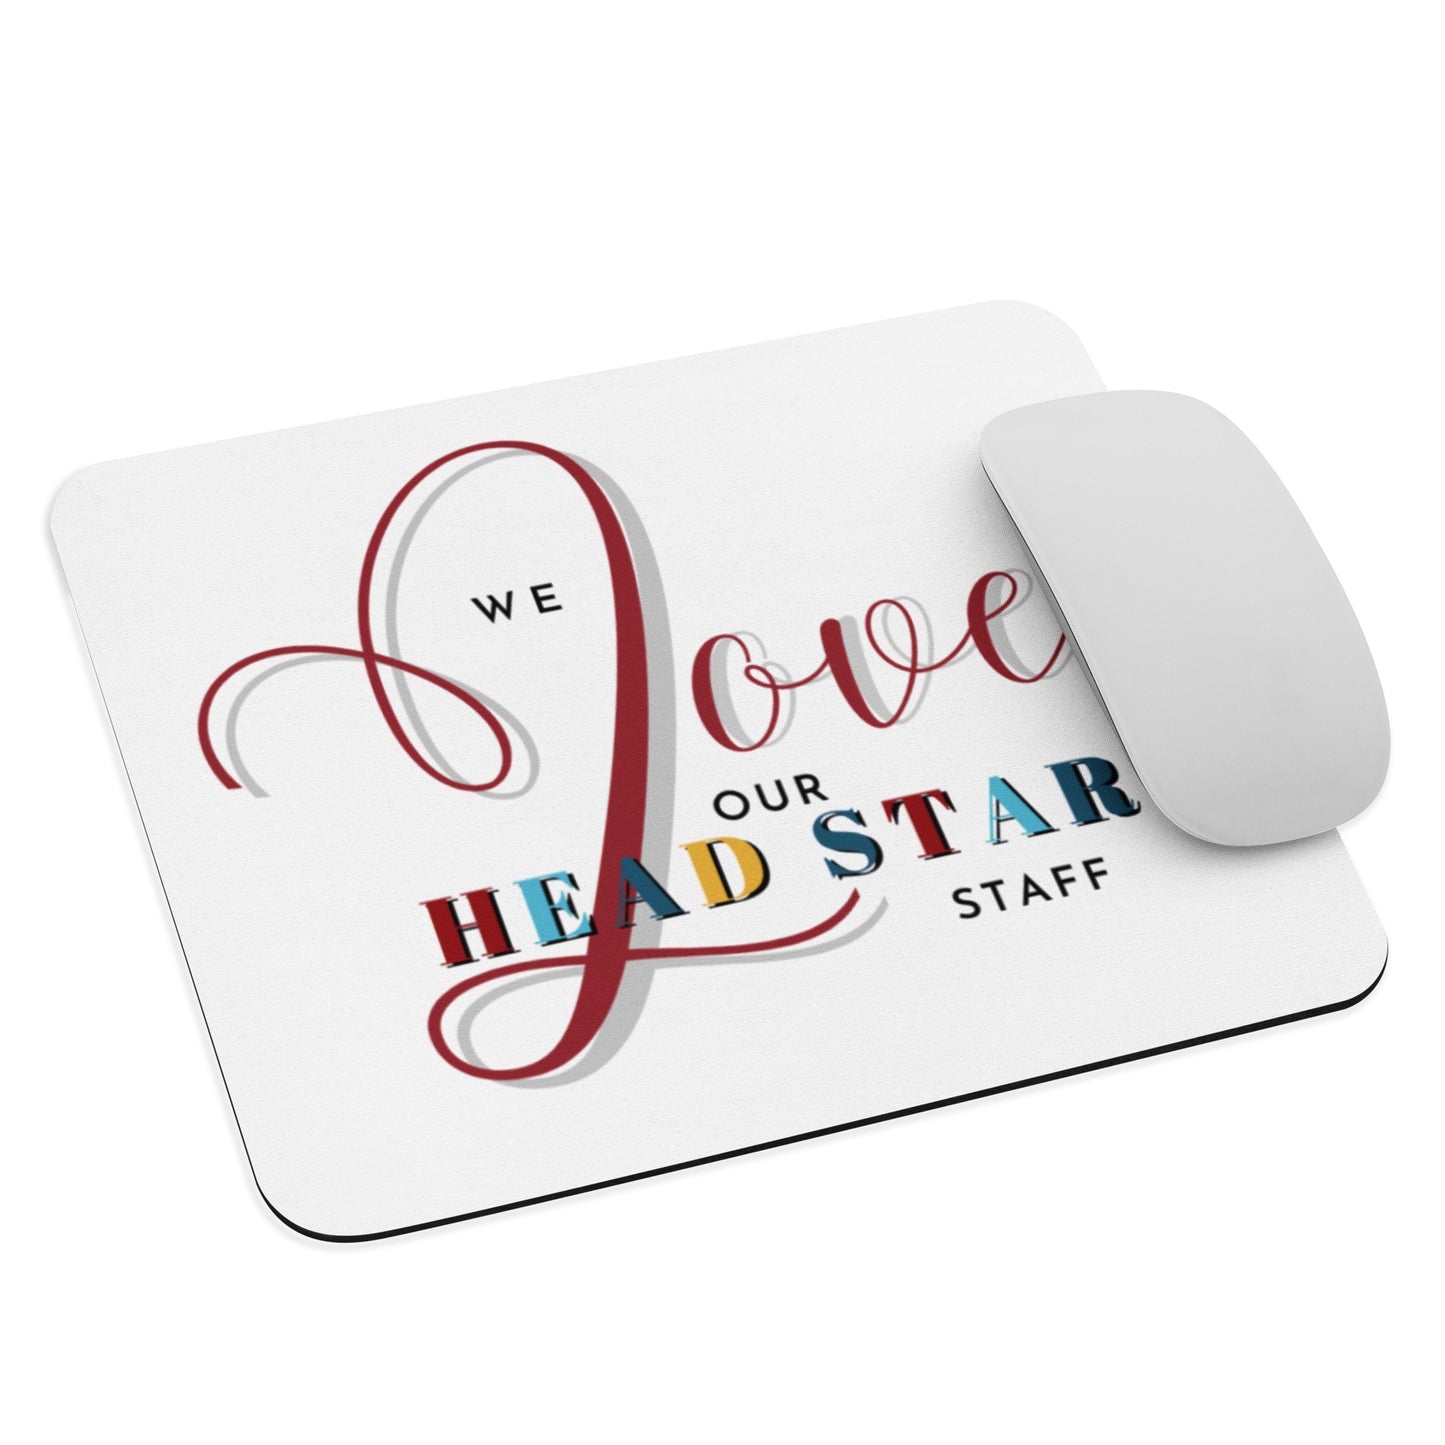 We Love Our Head Start Staff Mouse pad